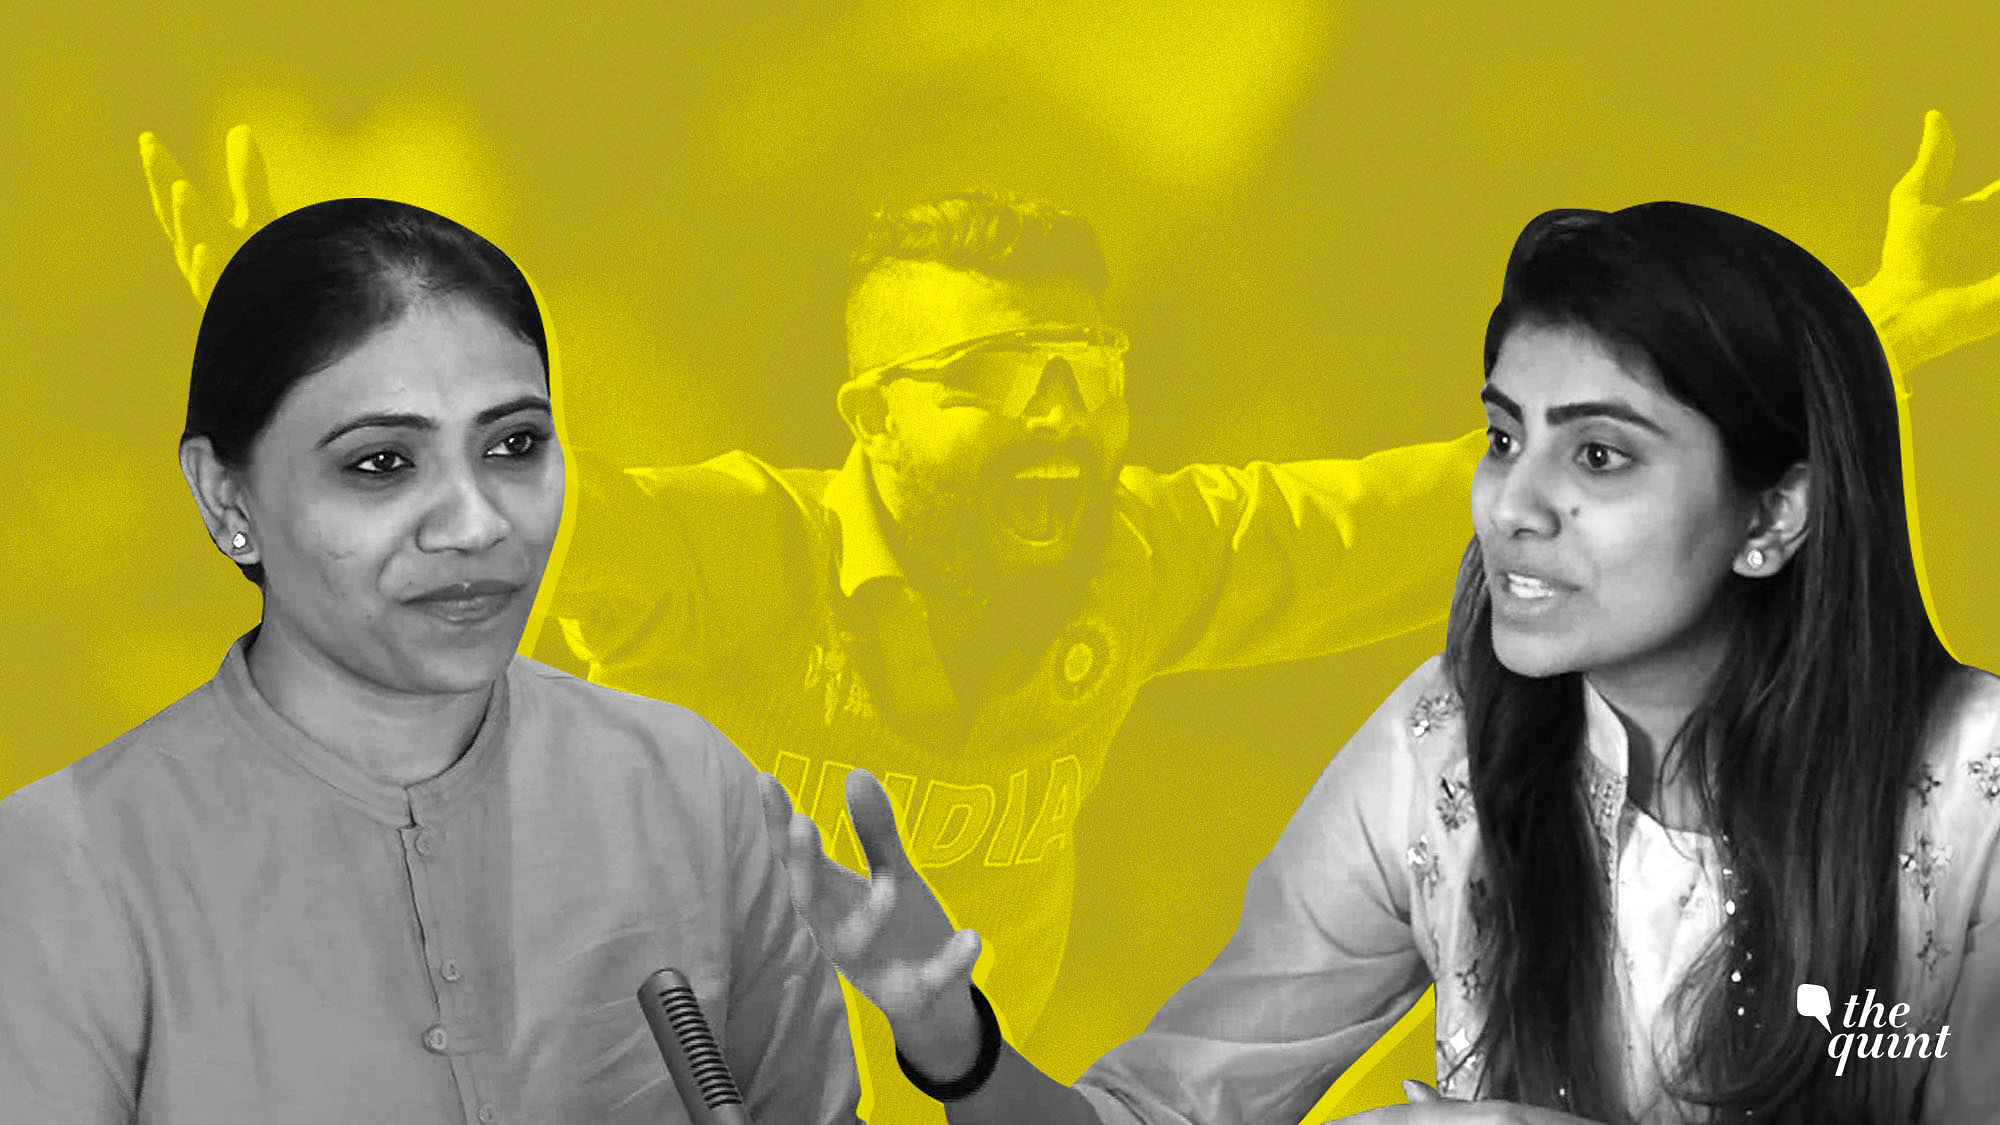 Ravindra Jadeja’s wife Rivaba Jadeja joined the BJP while his sister joined the National Women’s Party in February earlier this year.